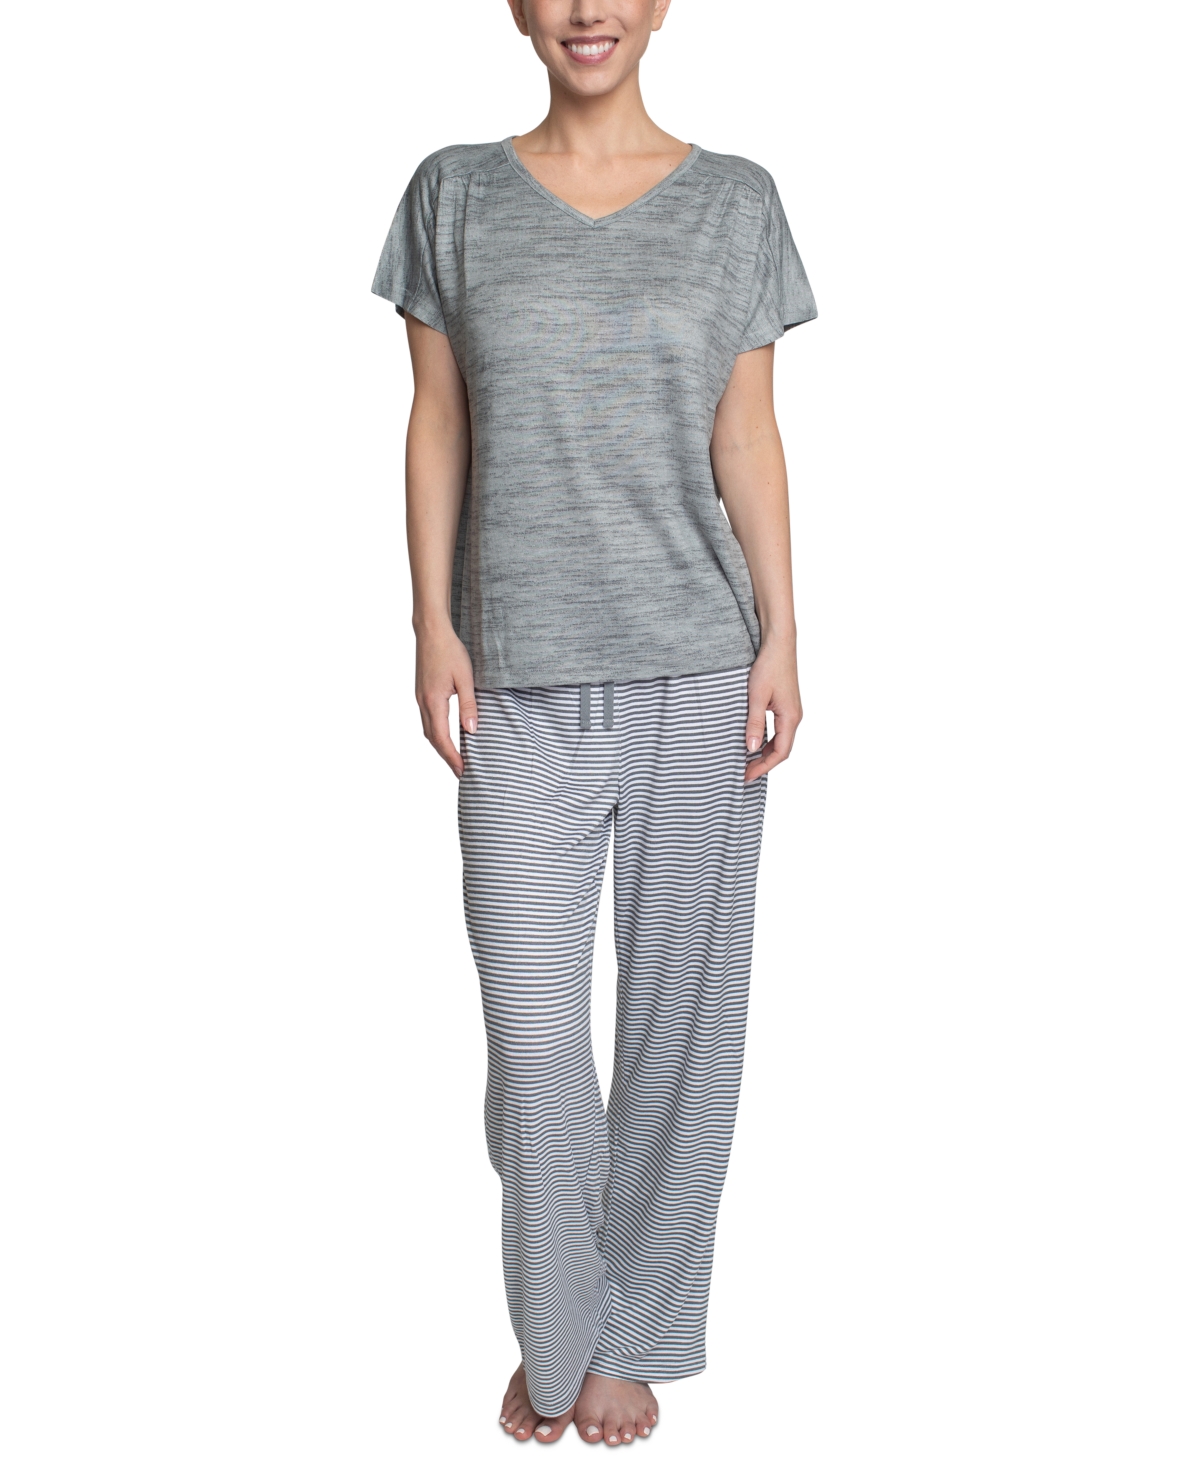 Women's Relaxed Butter-Knit Short Sleeve Pajama Set - Heather Grey Stripe